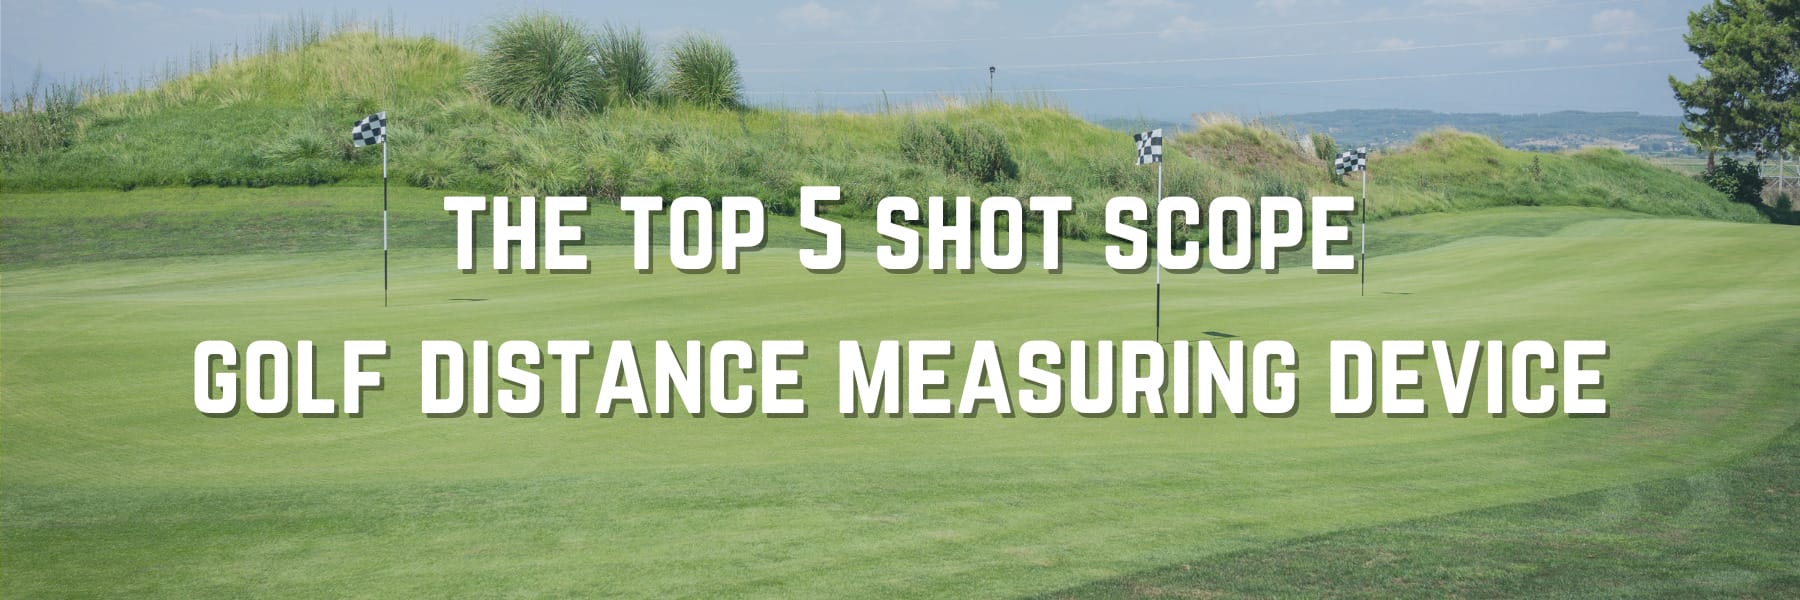 the top 5 shot scope golf distance measuring device